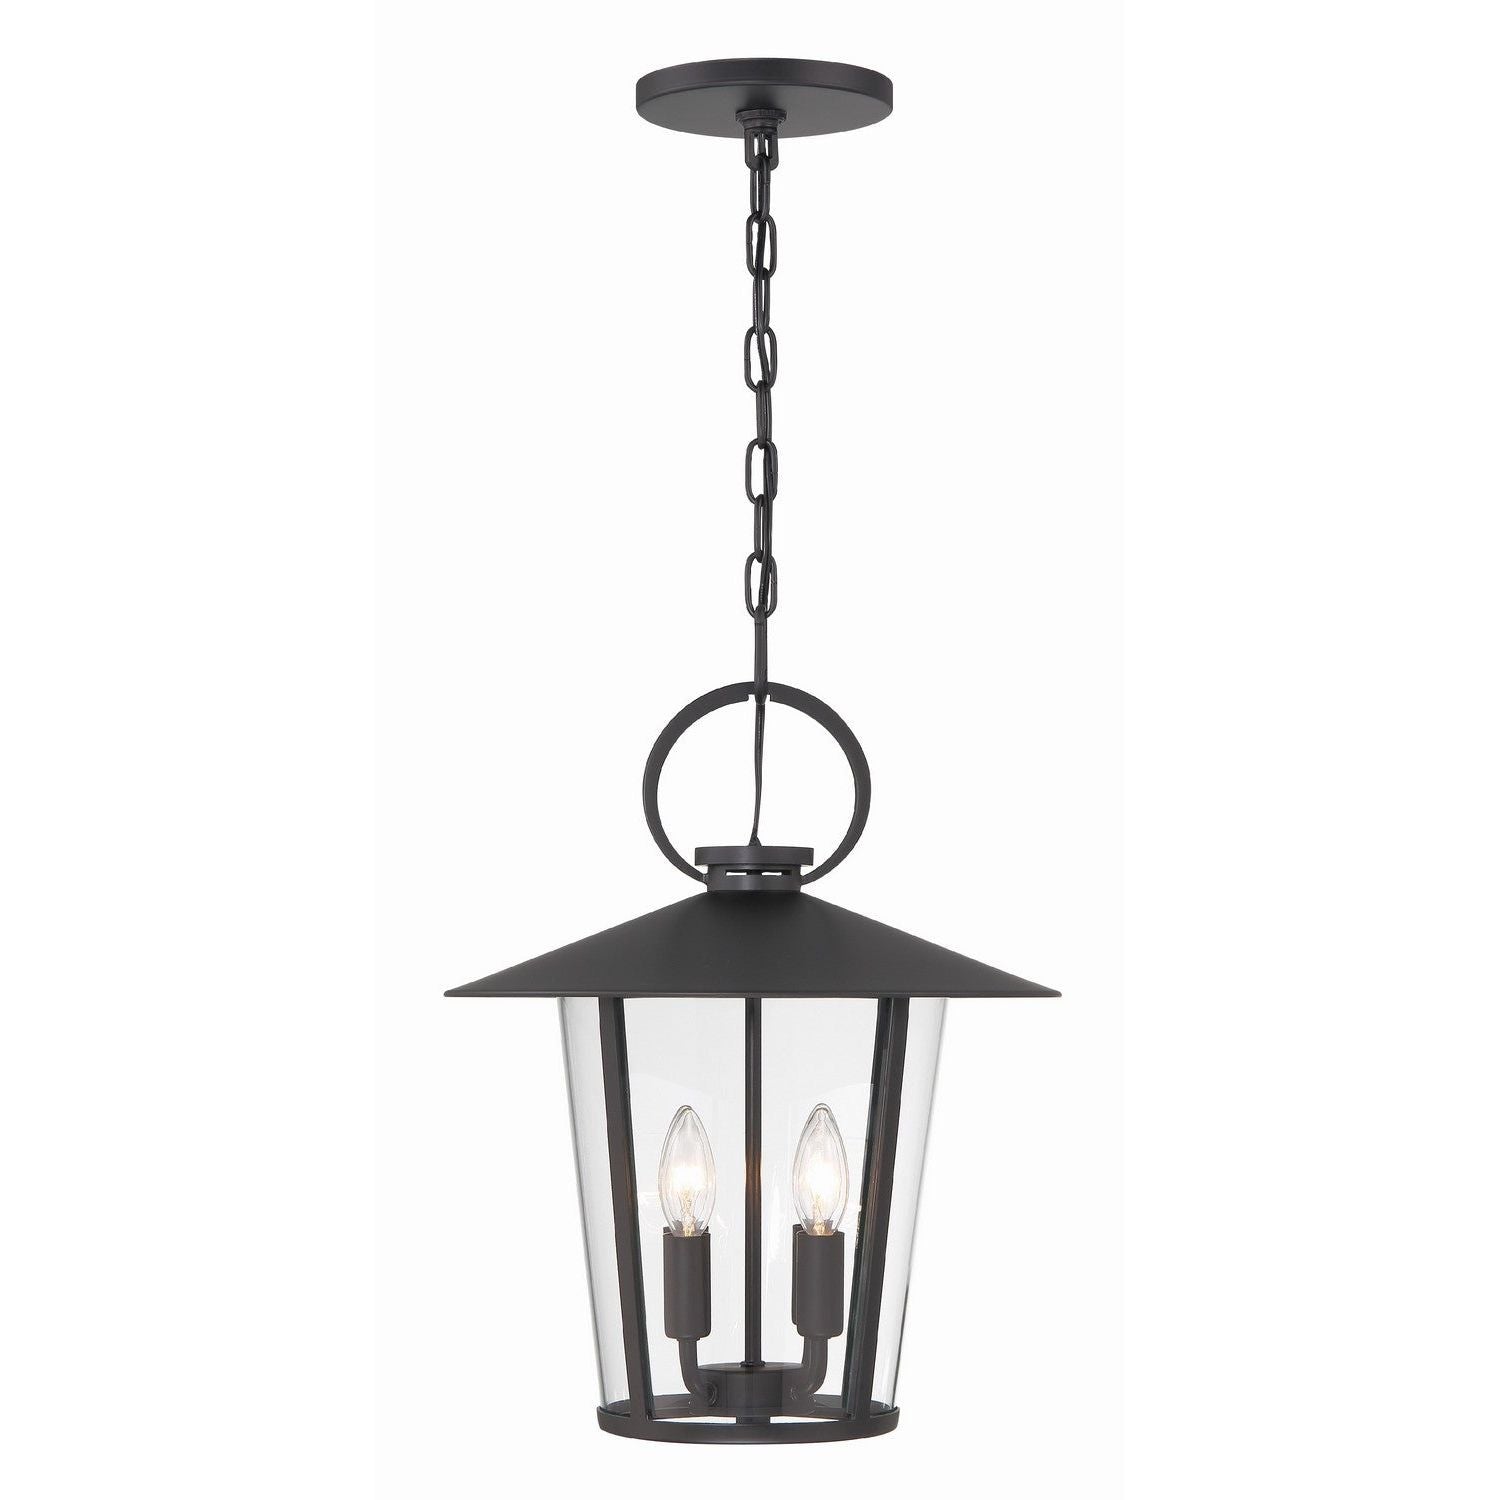 Crystorama - AND-9204-CL-MK - Four Light Outdoor Chandelier - Andover - Matte Black